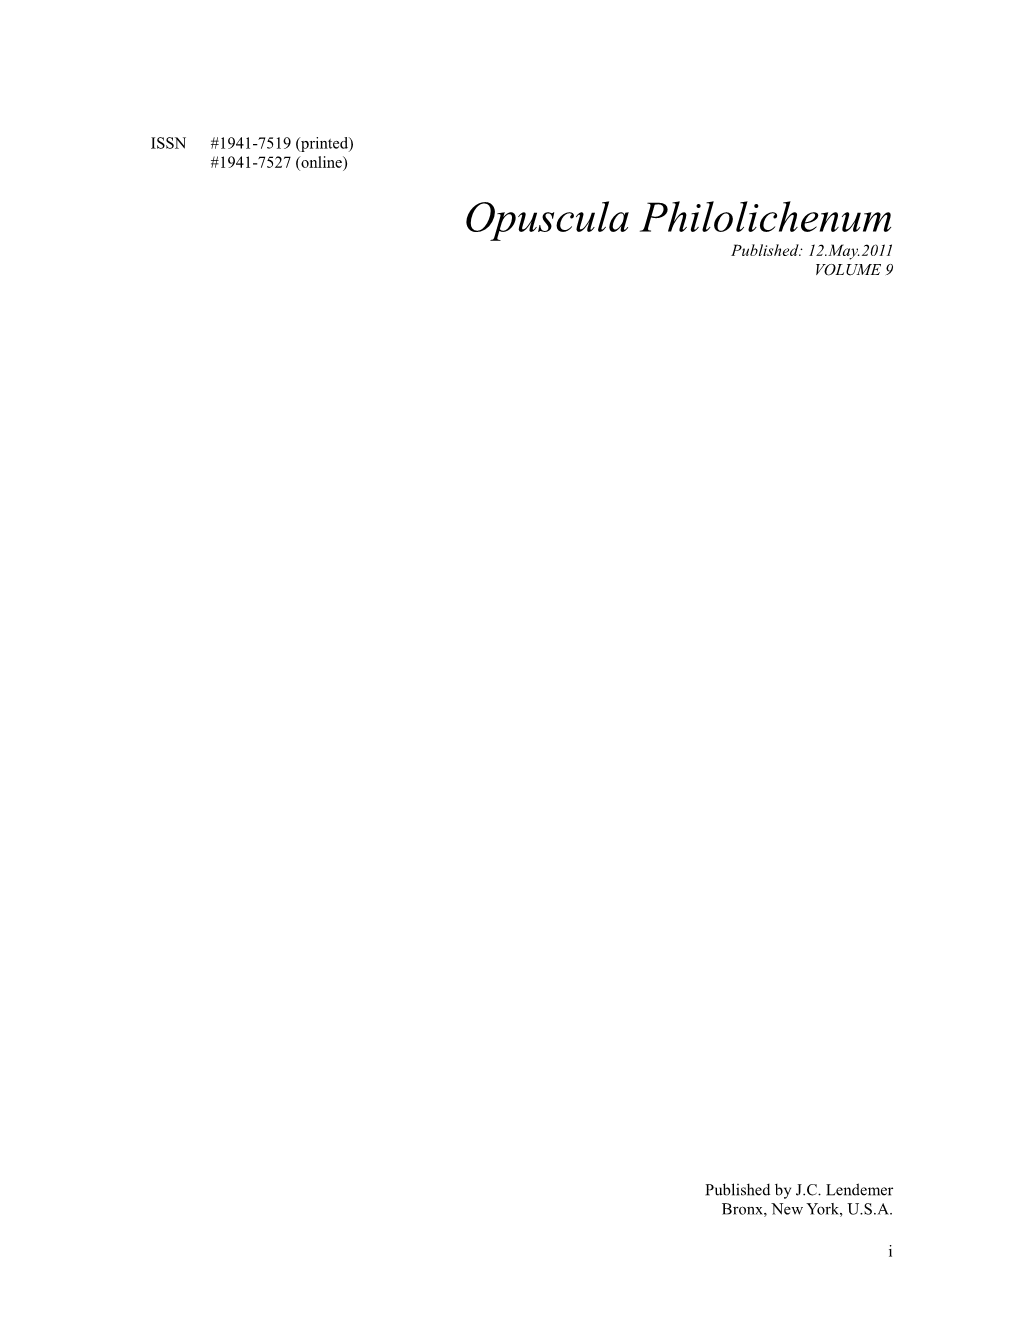 Opuscula Philolichenum Published: 12.May.2011 VOLUME 9